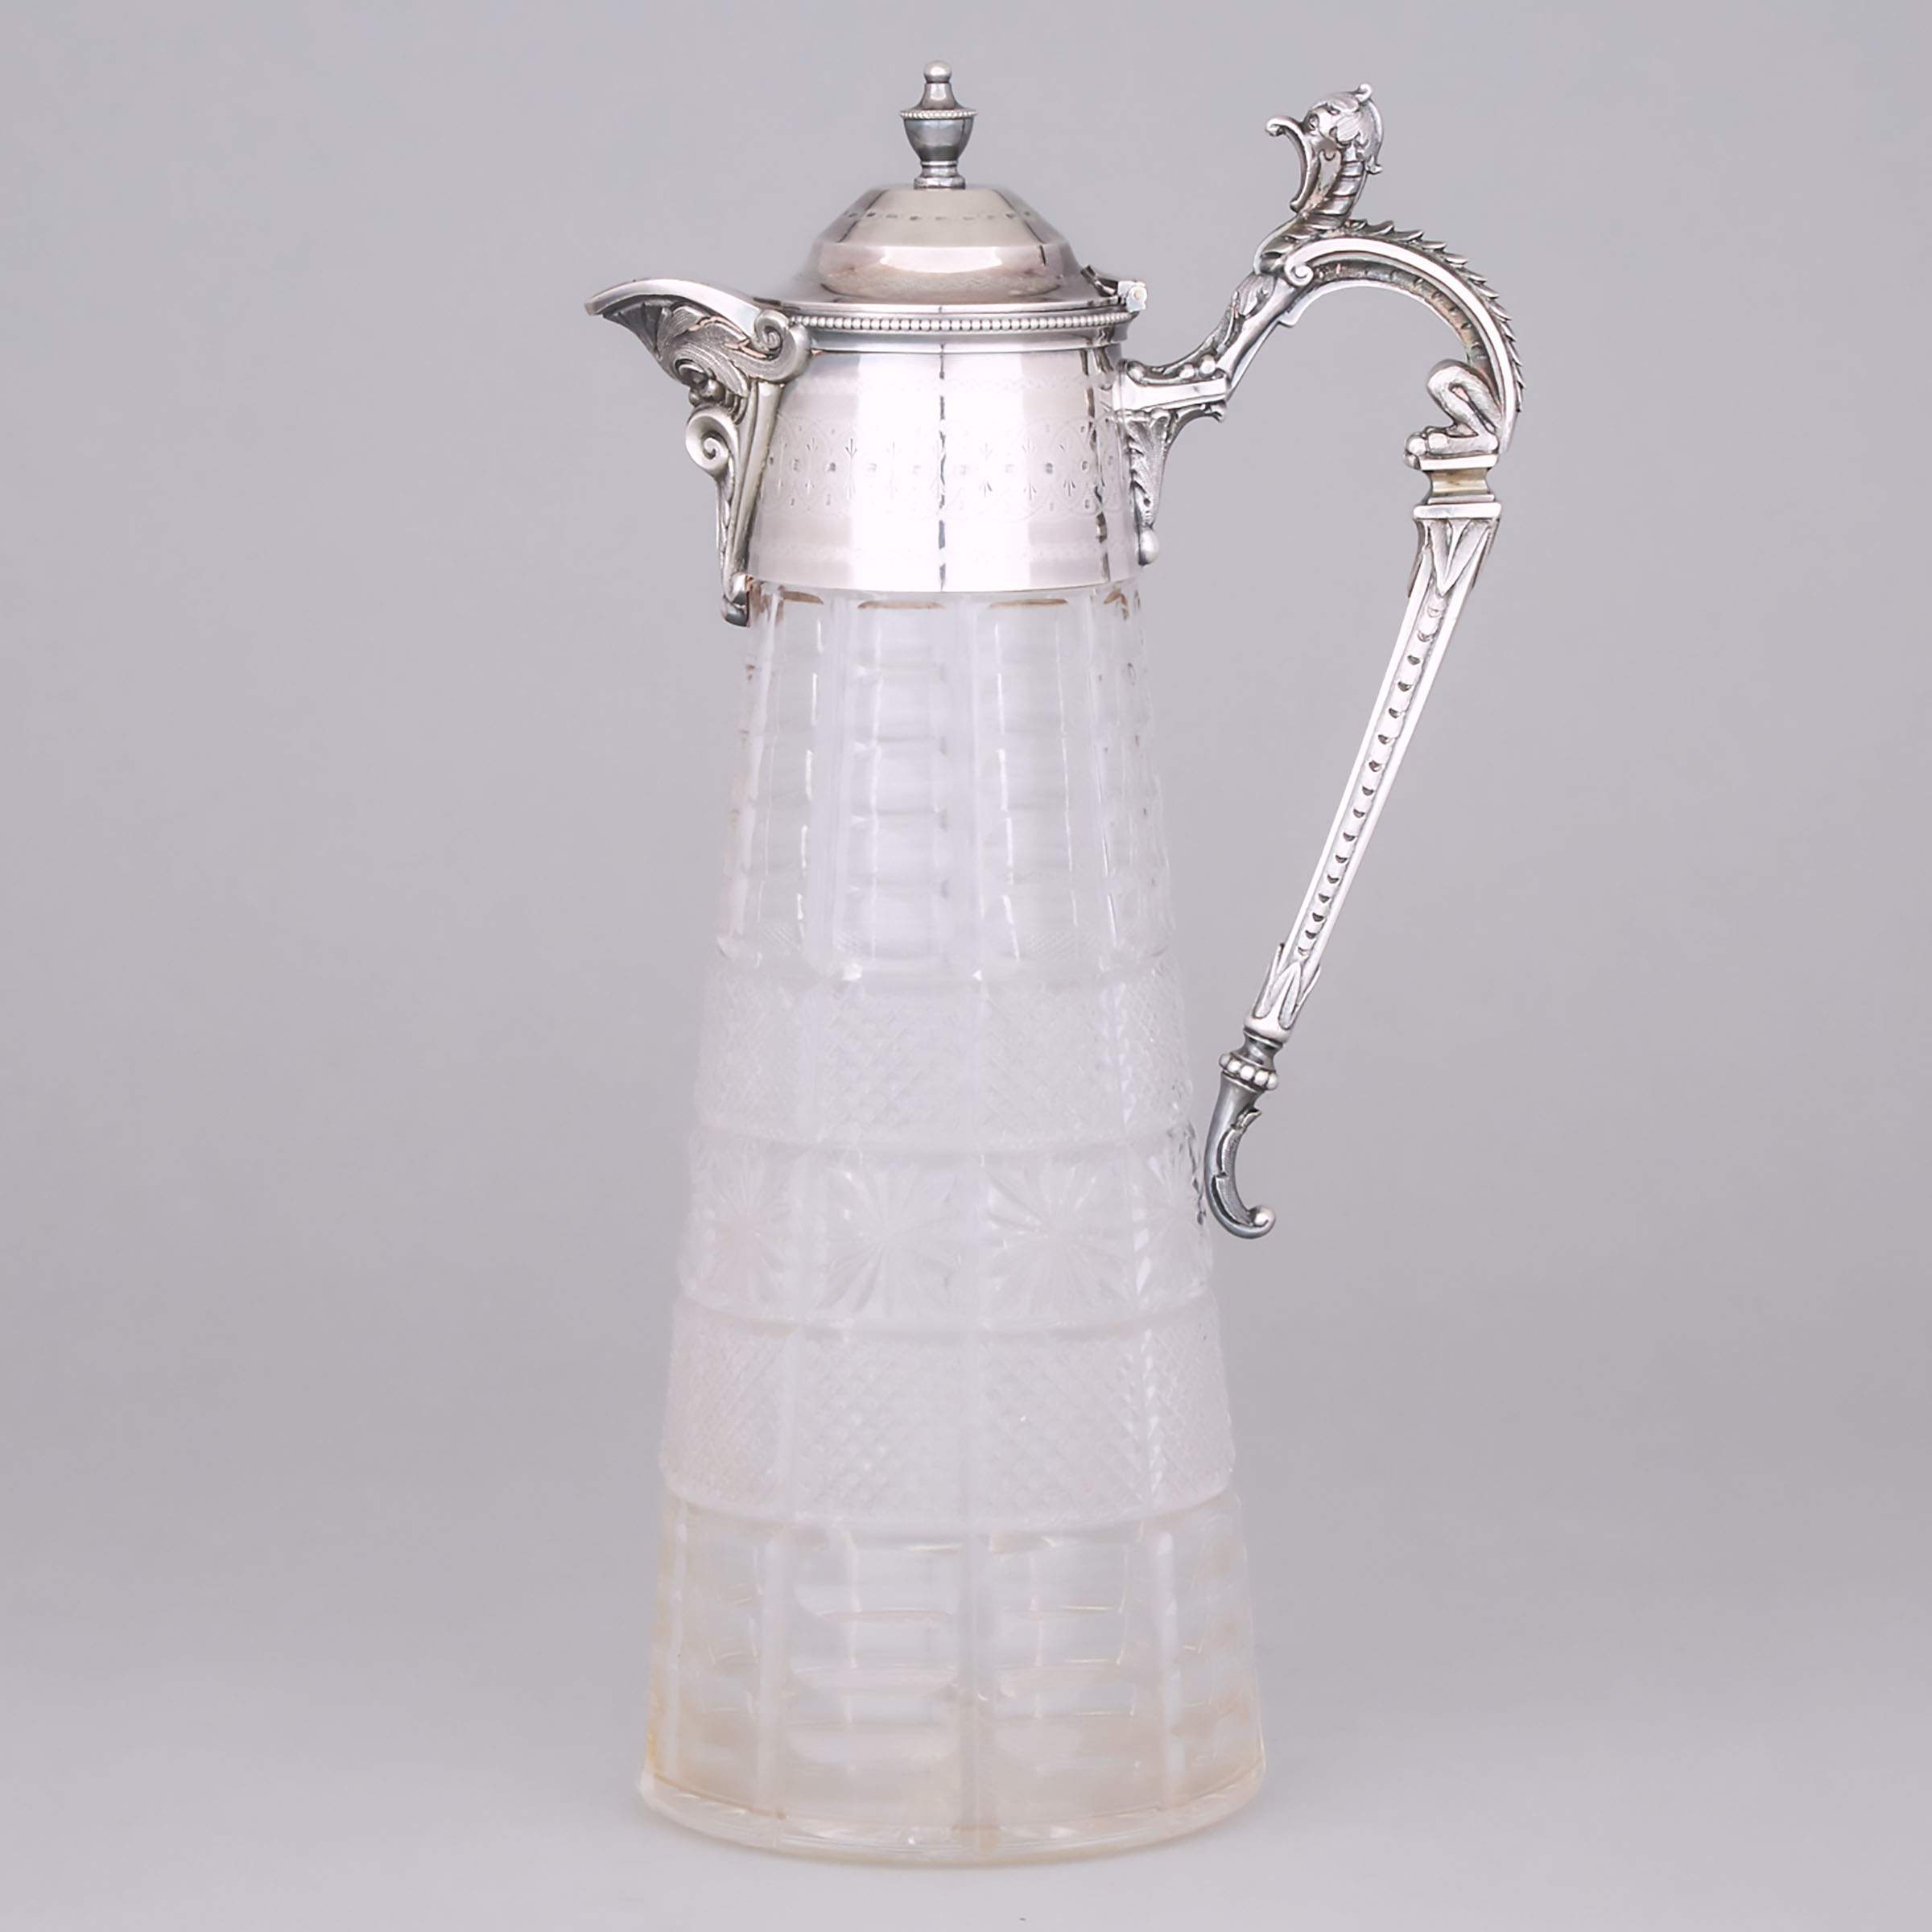 Edwardian Silver Plated and Cut Glass Claret Jug, early 20th century